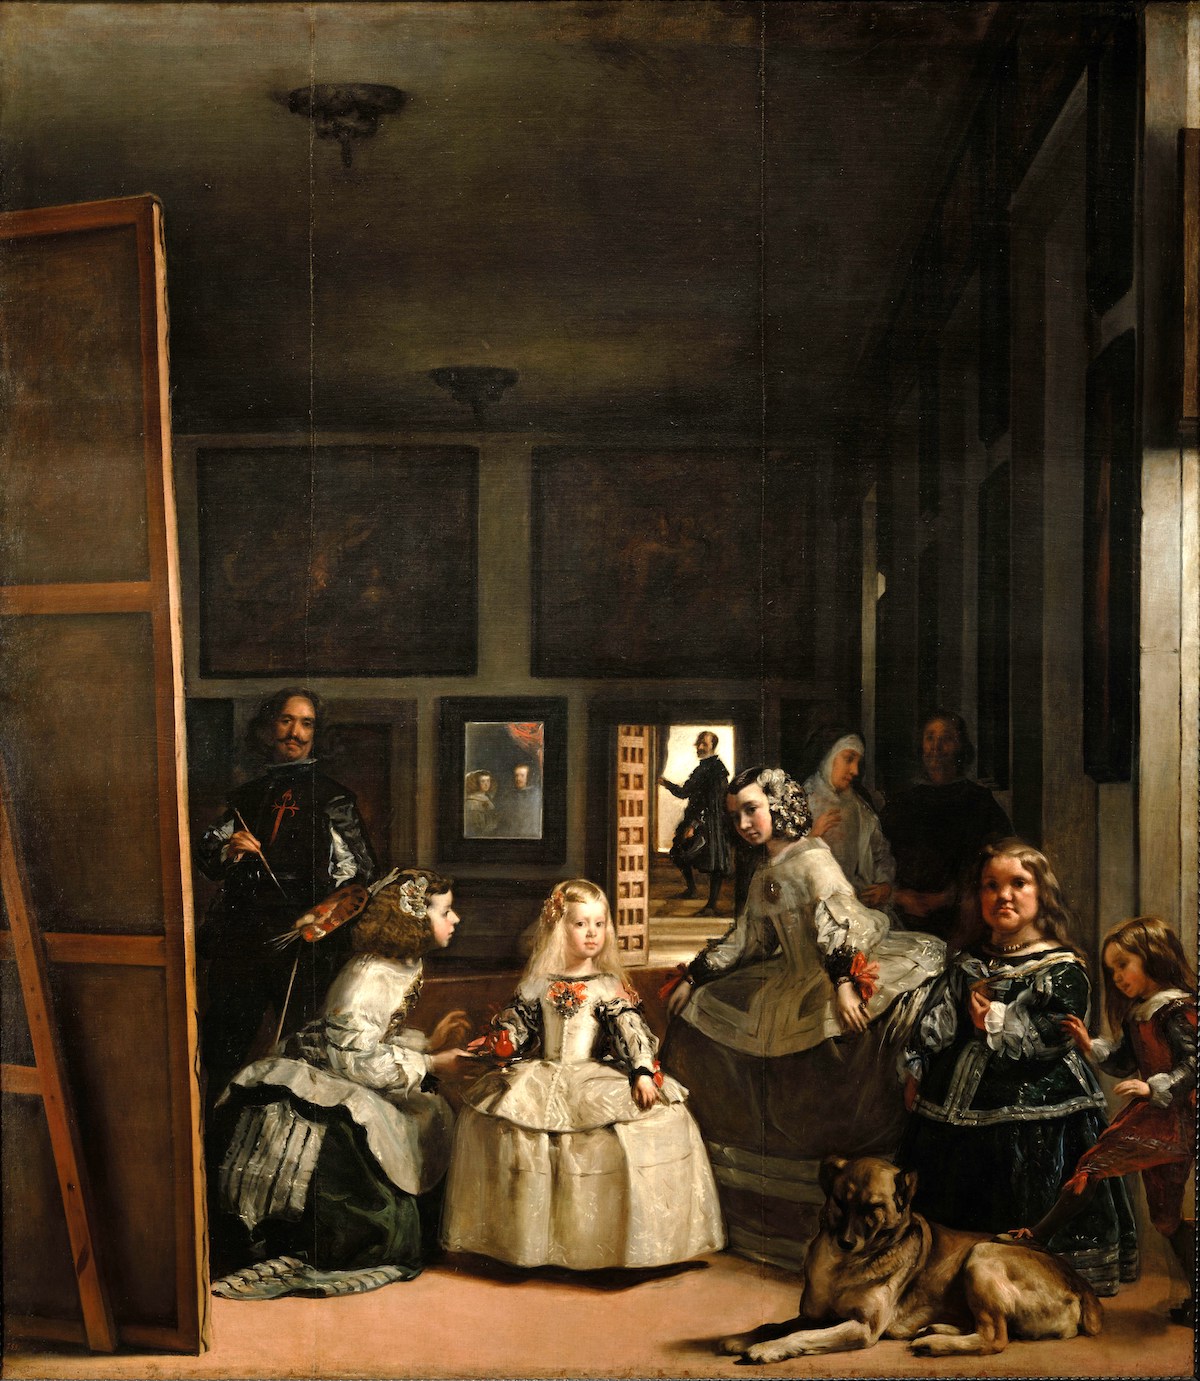 Las Meninas, an oil on canvas painting by Diego Velázquez, depicting the Spanish Royal Family in the 17th century.